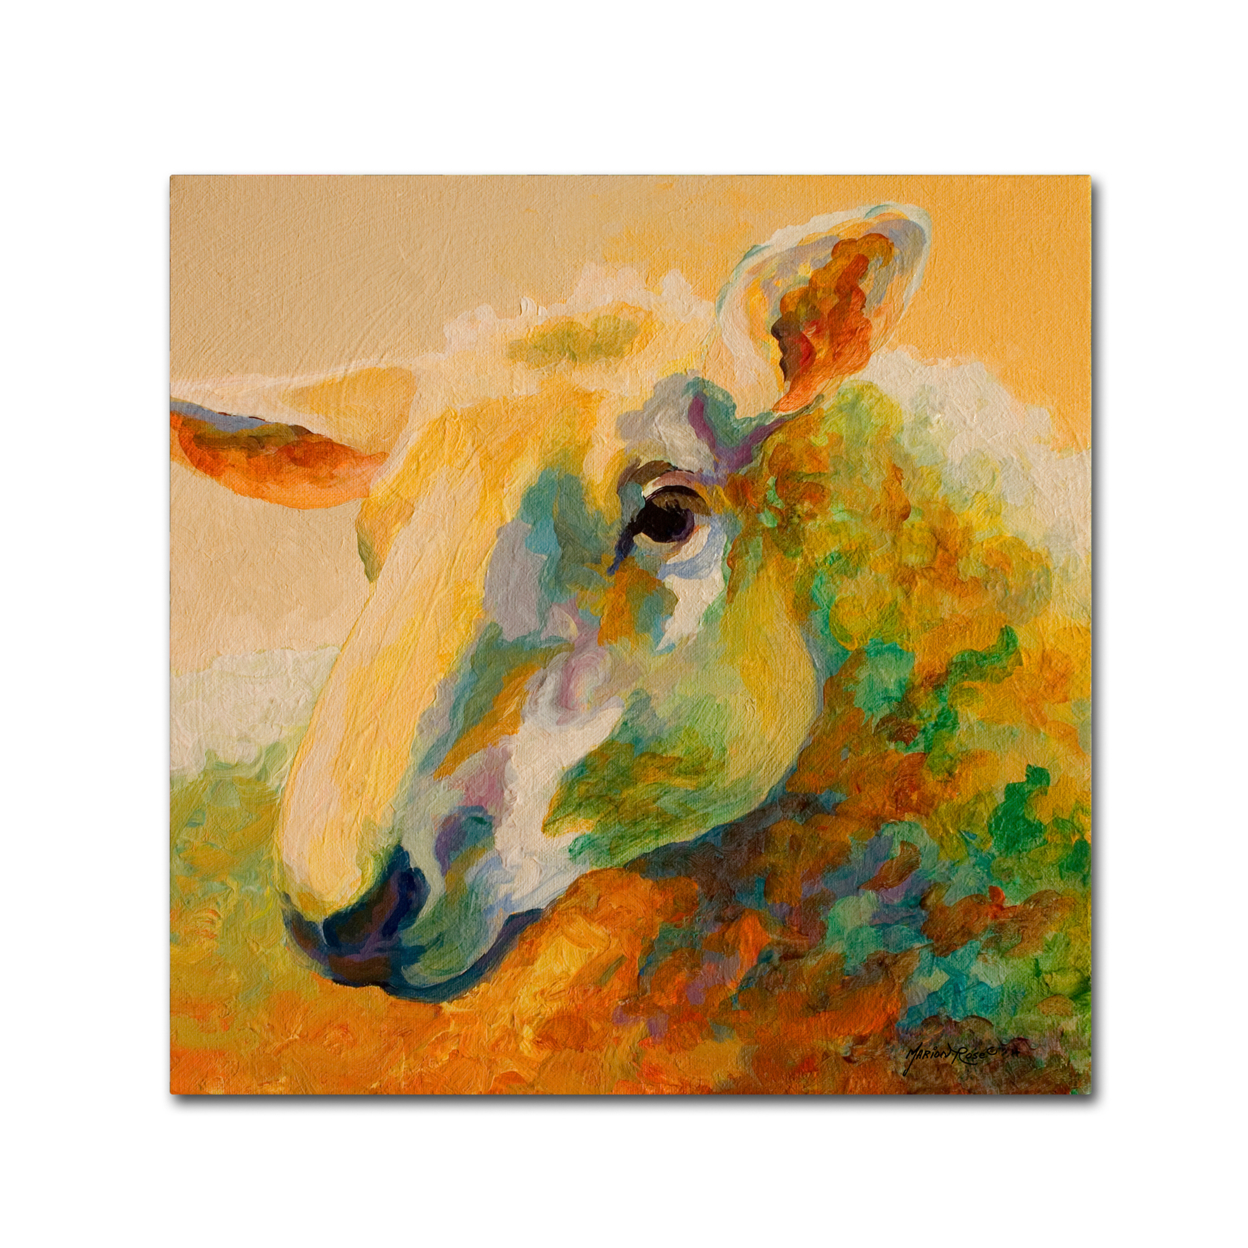 Marion Rose 'Ewe Study III' Ready To Hang Canvas Art 24 X 24 Inches Made In USA